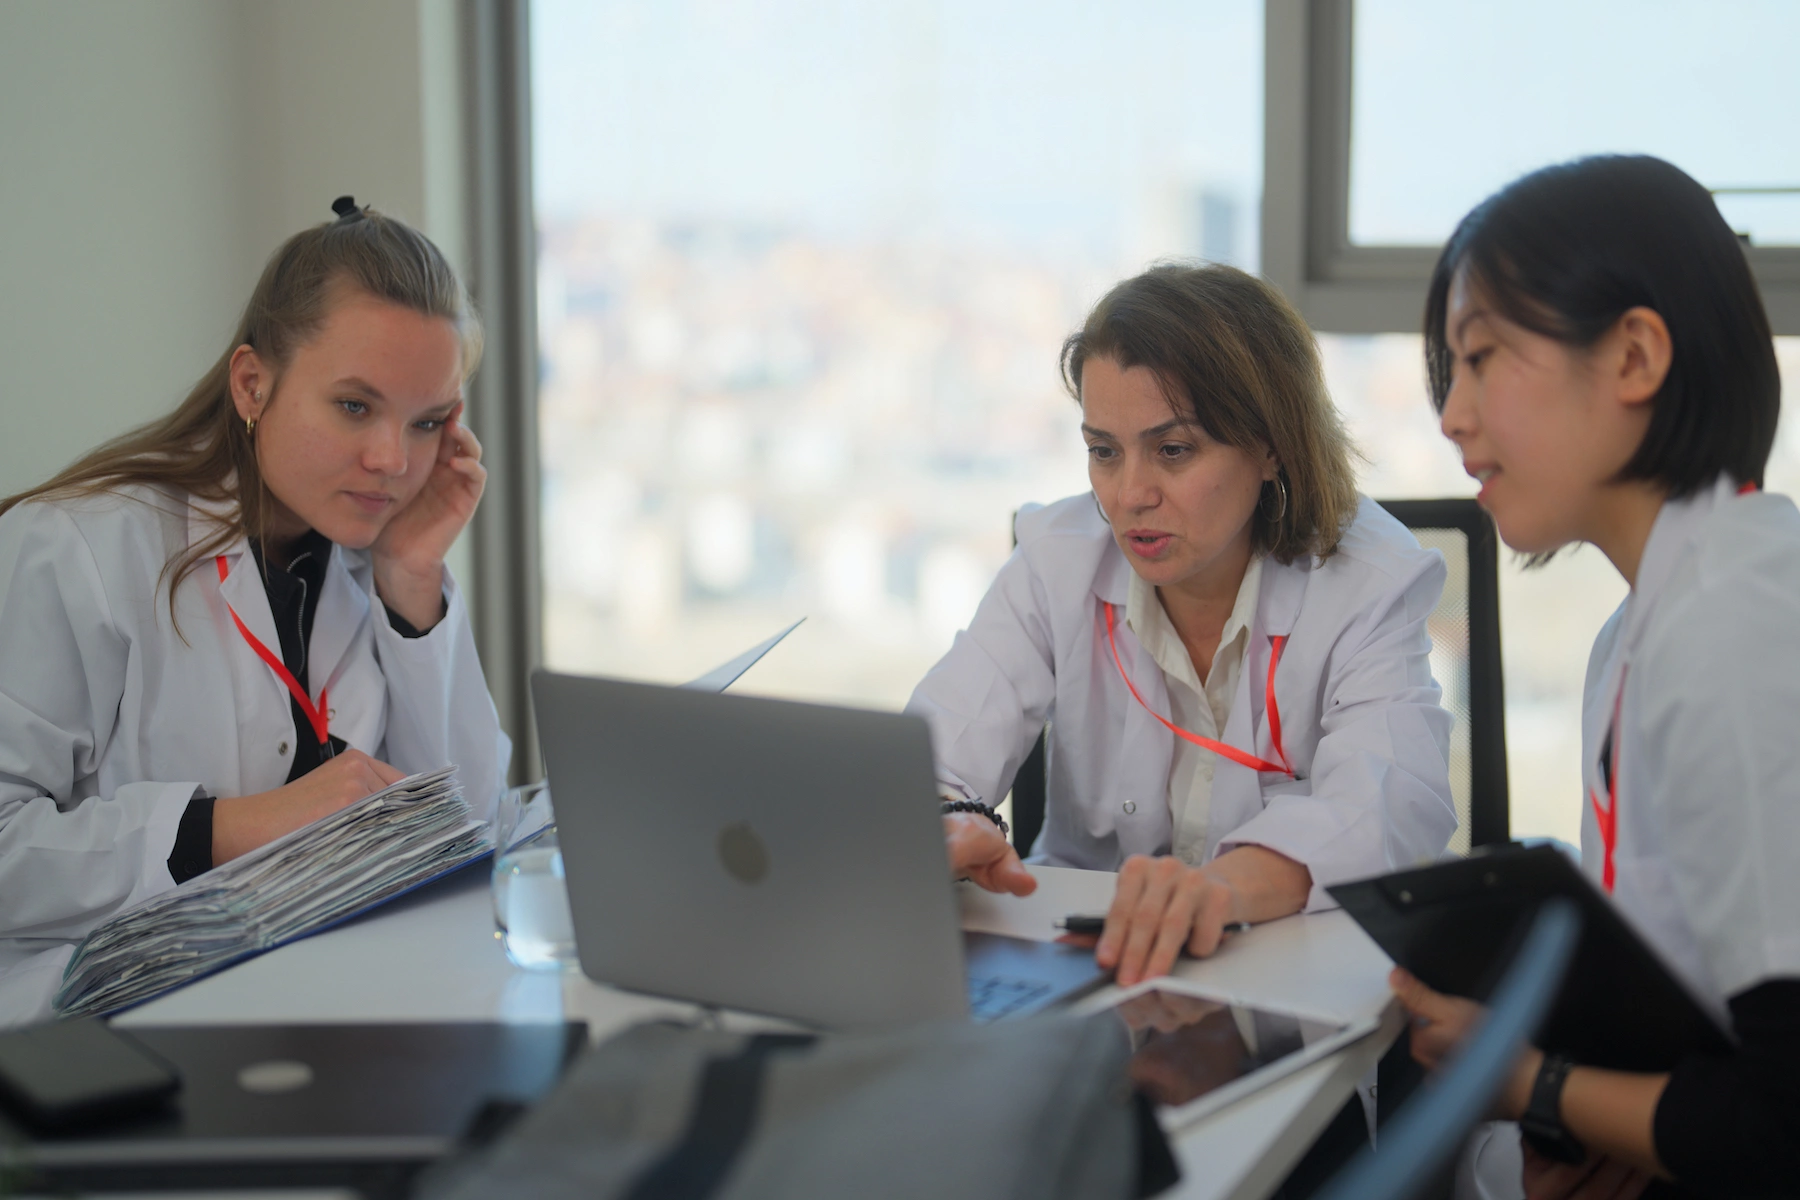 A group of three female doctors sit around a table looking at a laptop during a staff meeting